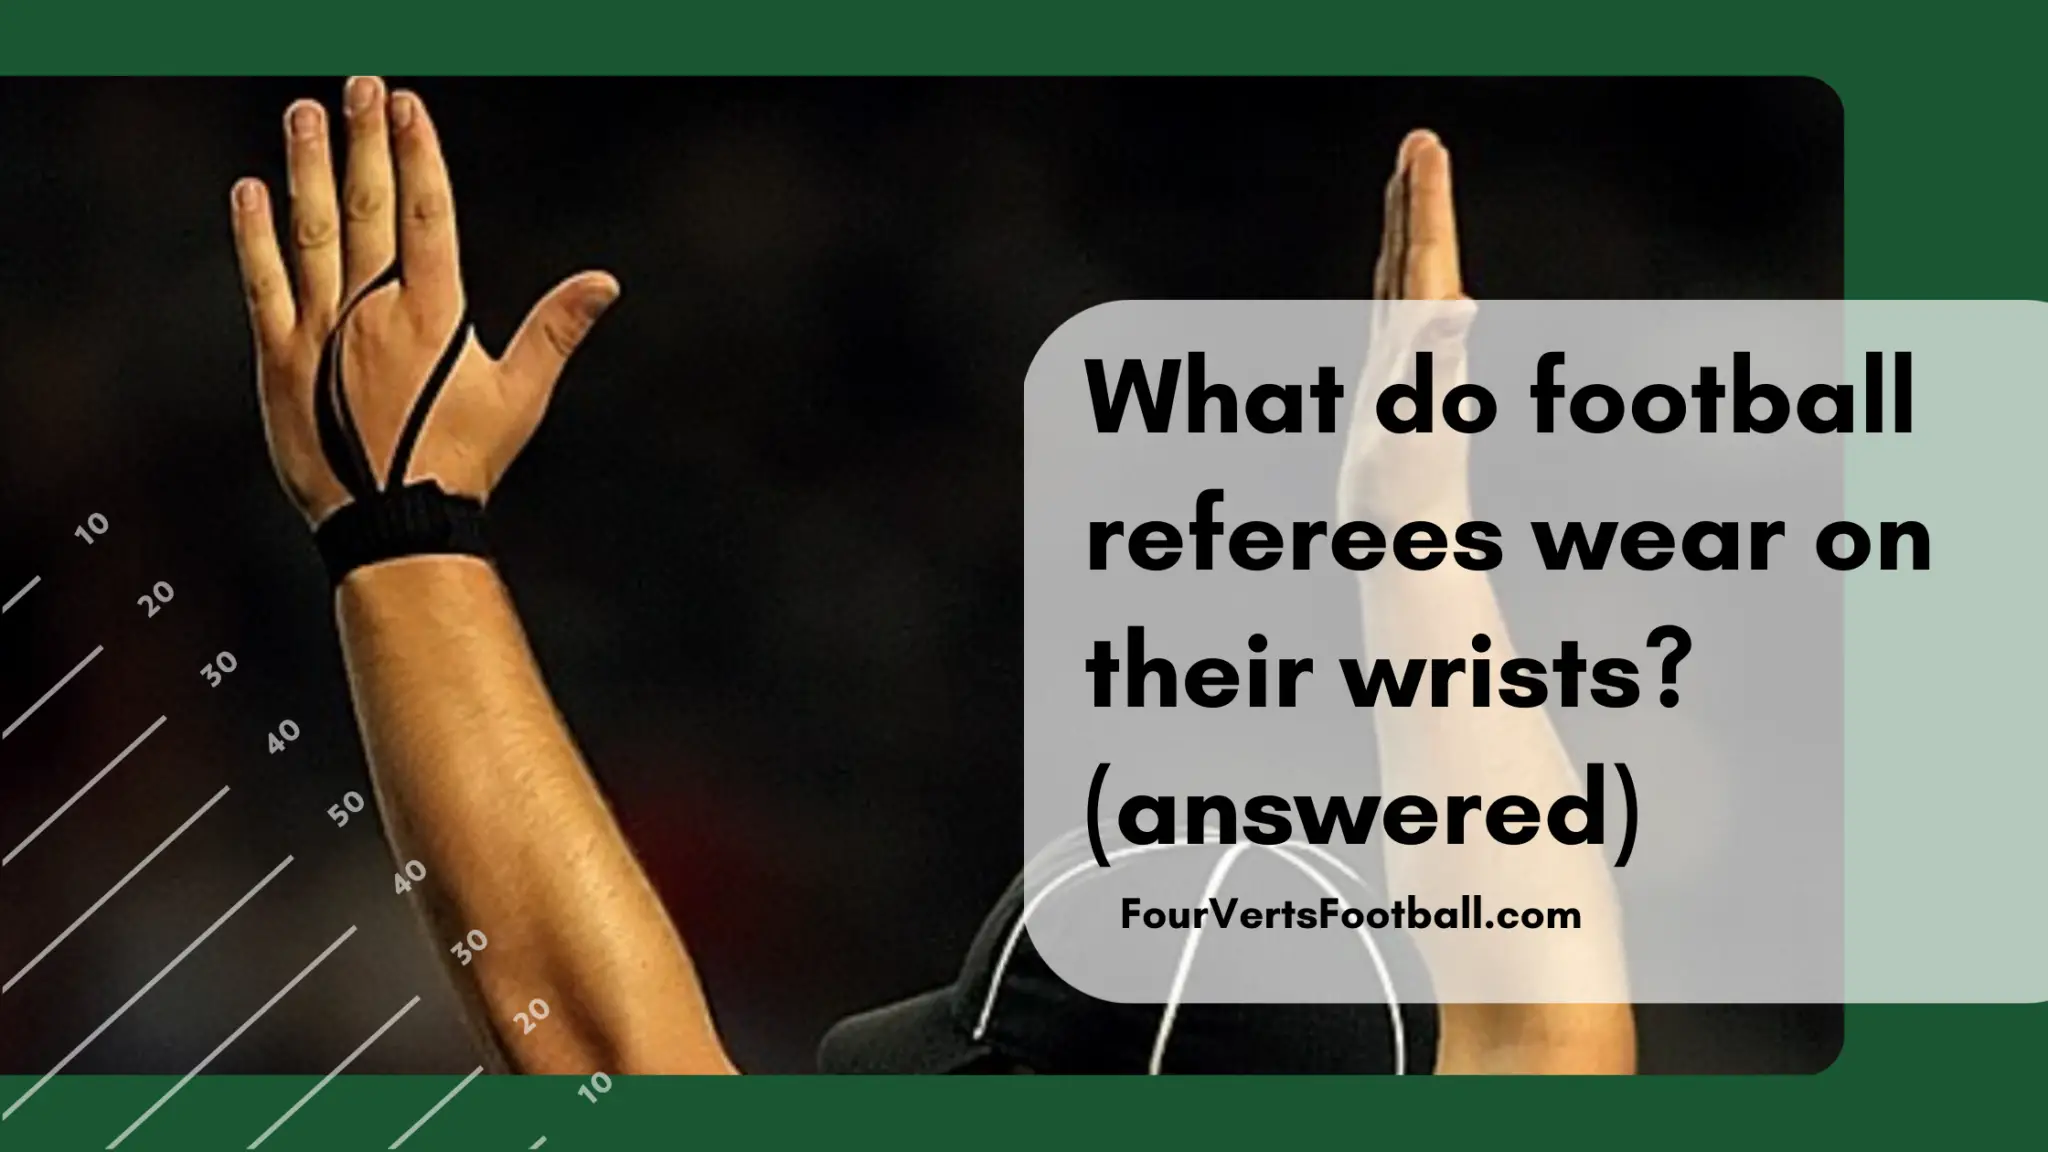 What do football referees wear on their wrists? - Four Verts Football